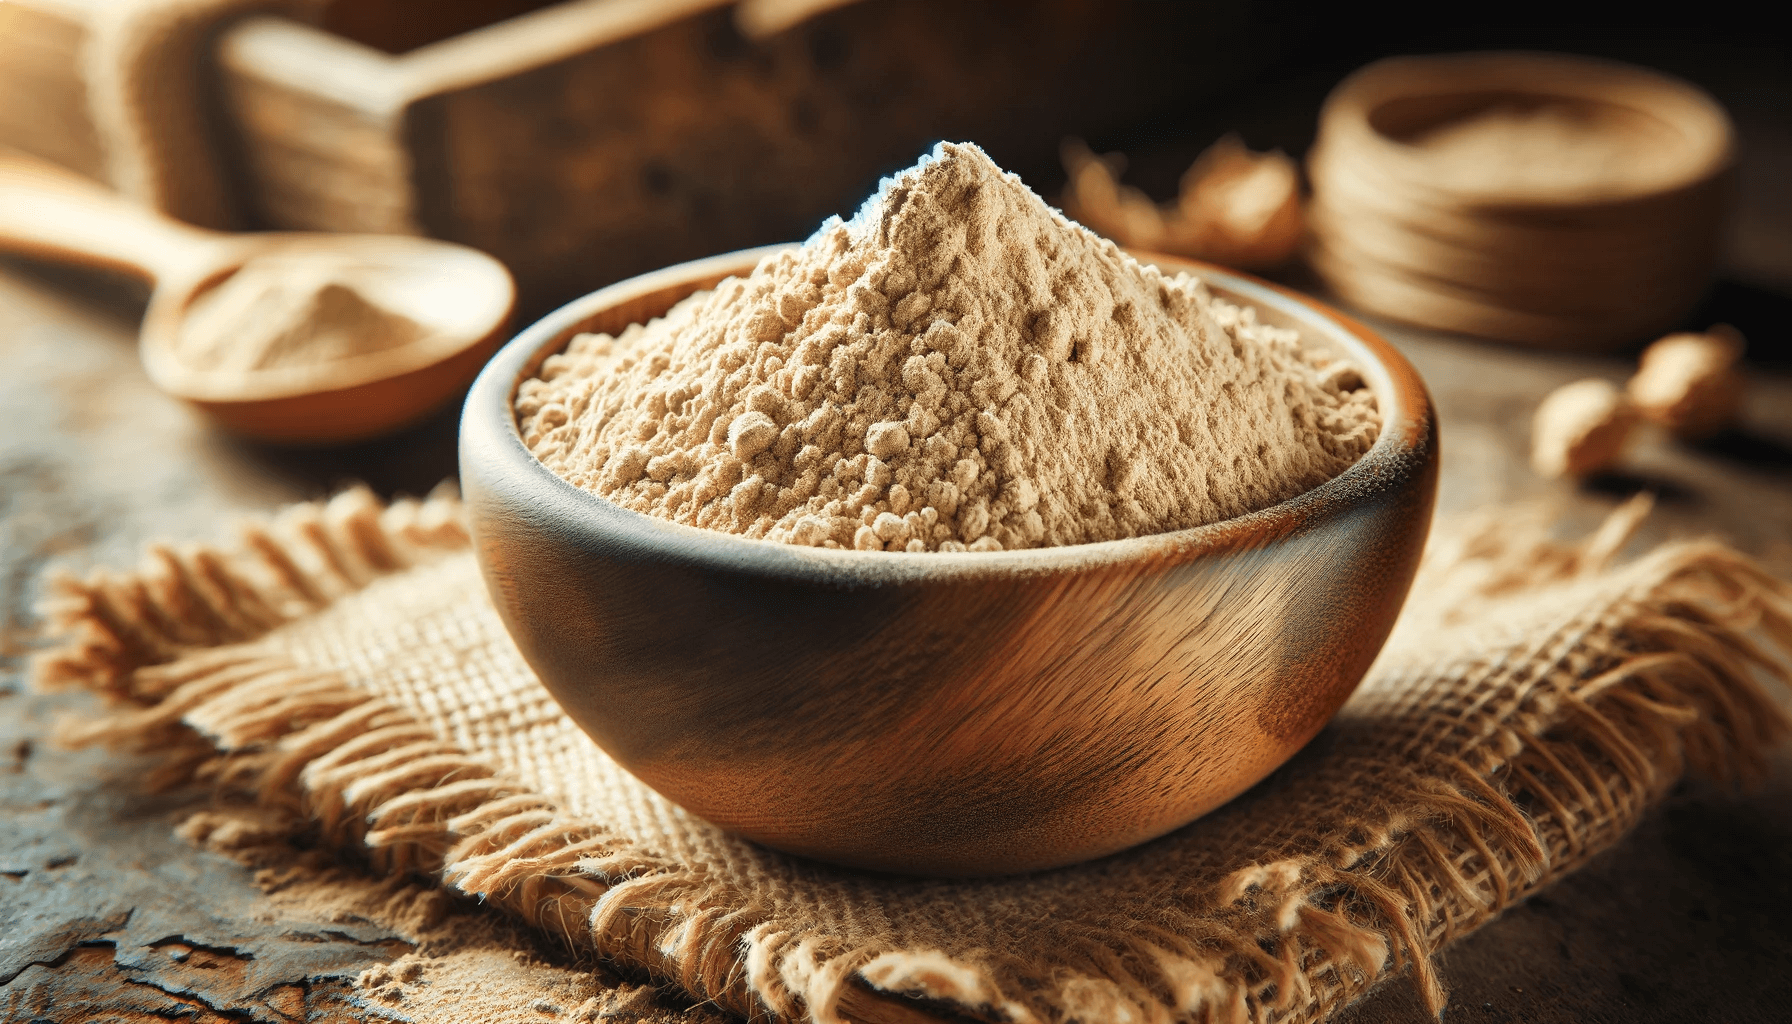 Wooden bowl filled with fine beige-colored ground Ashwagandha powder